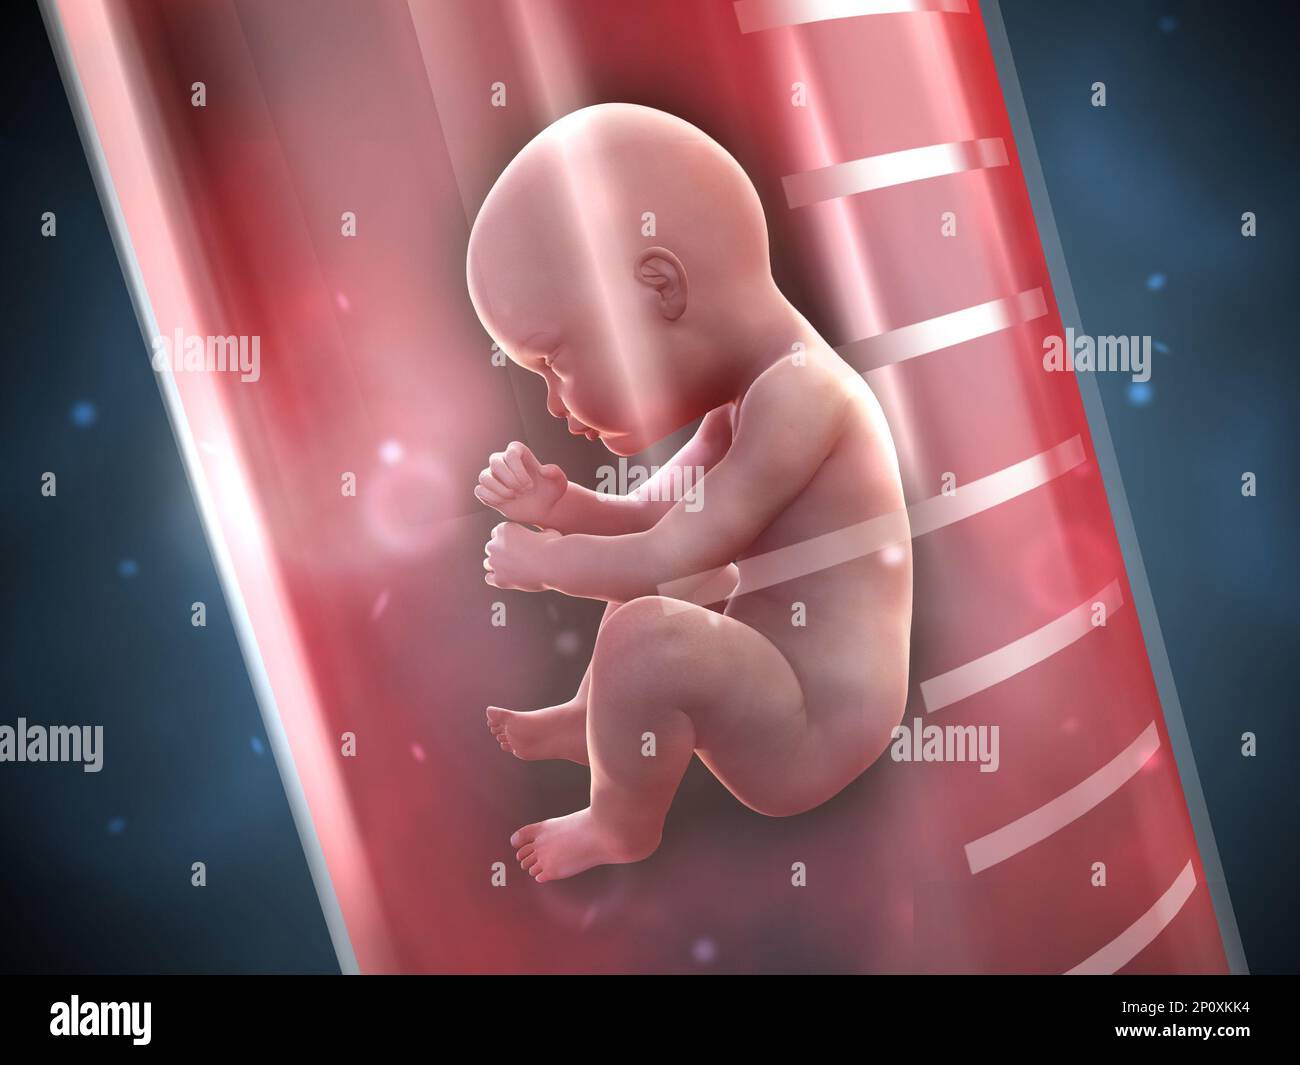 Human fetus in a test tube. 3D illustration. Stock Photo